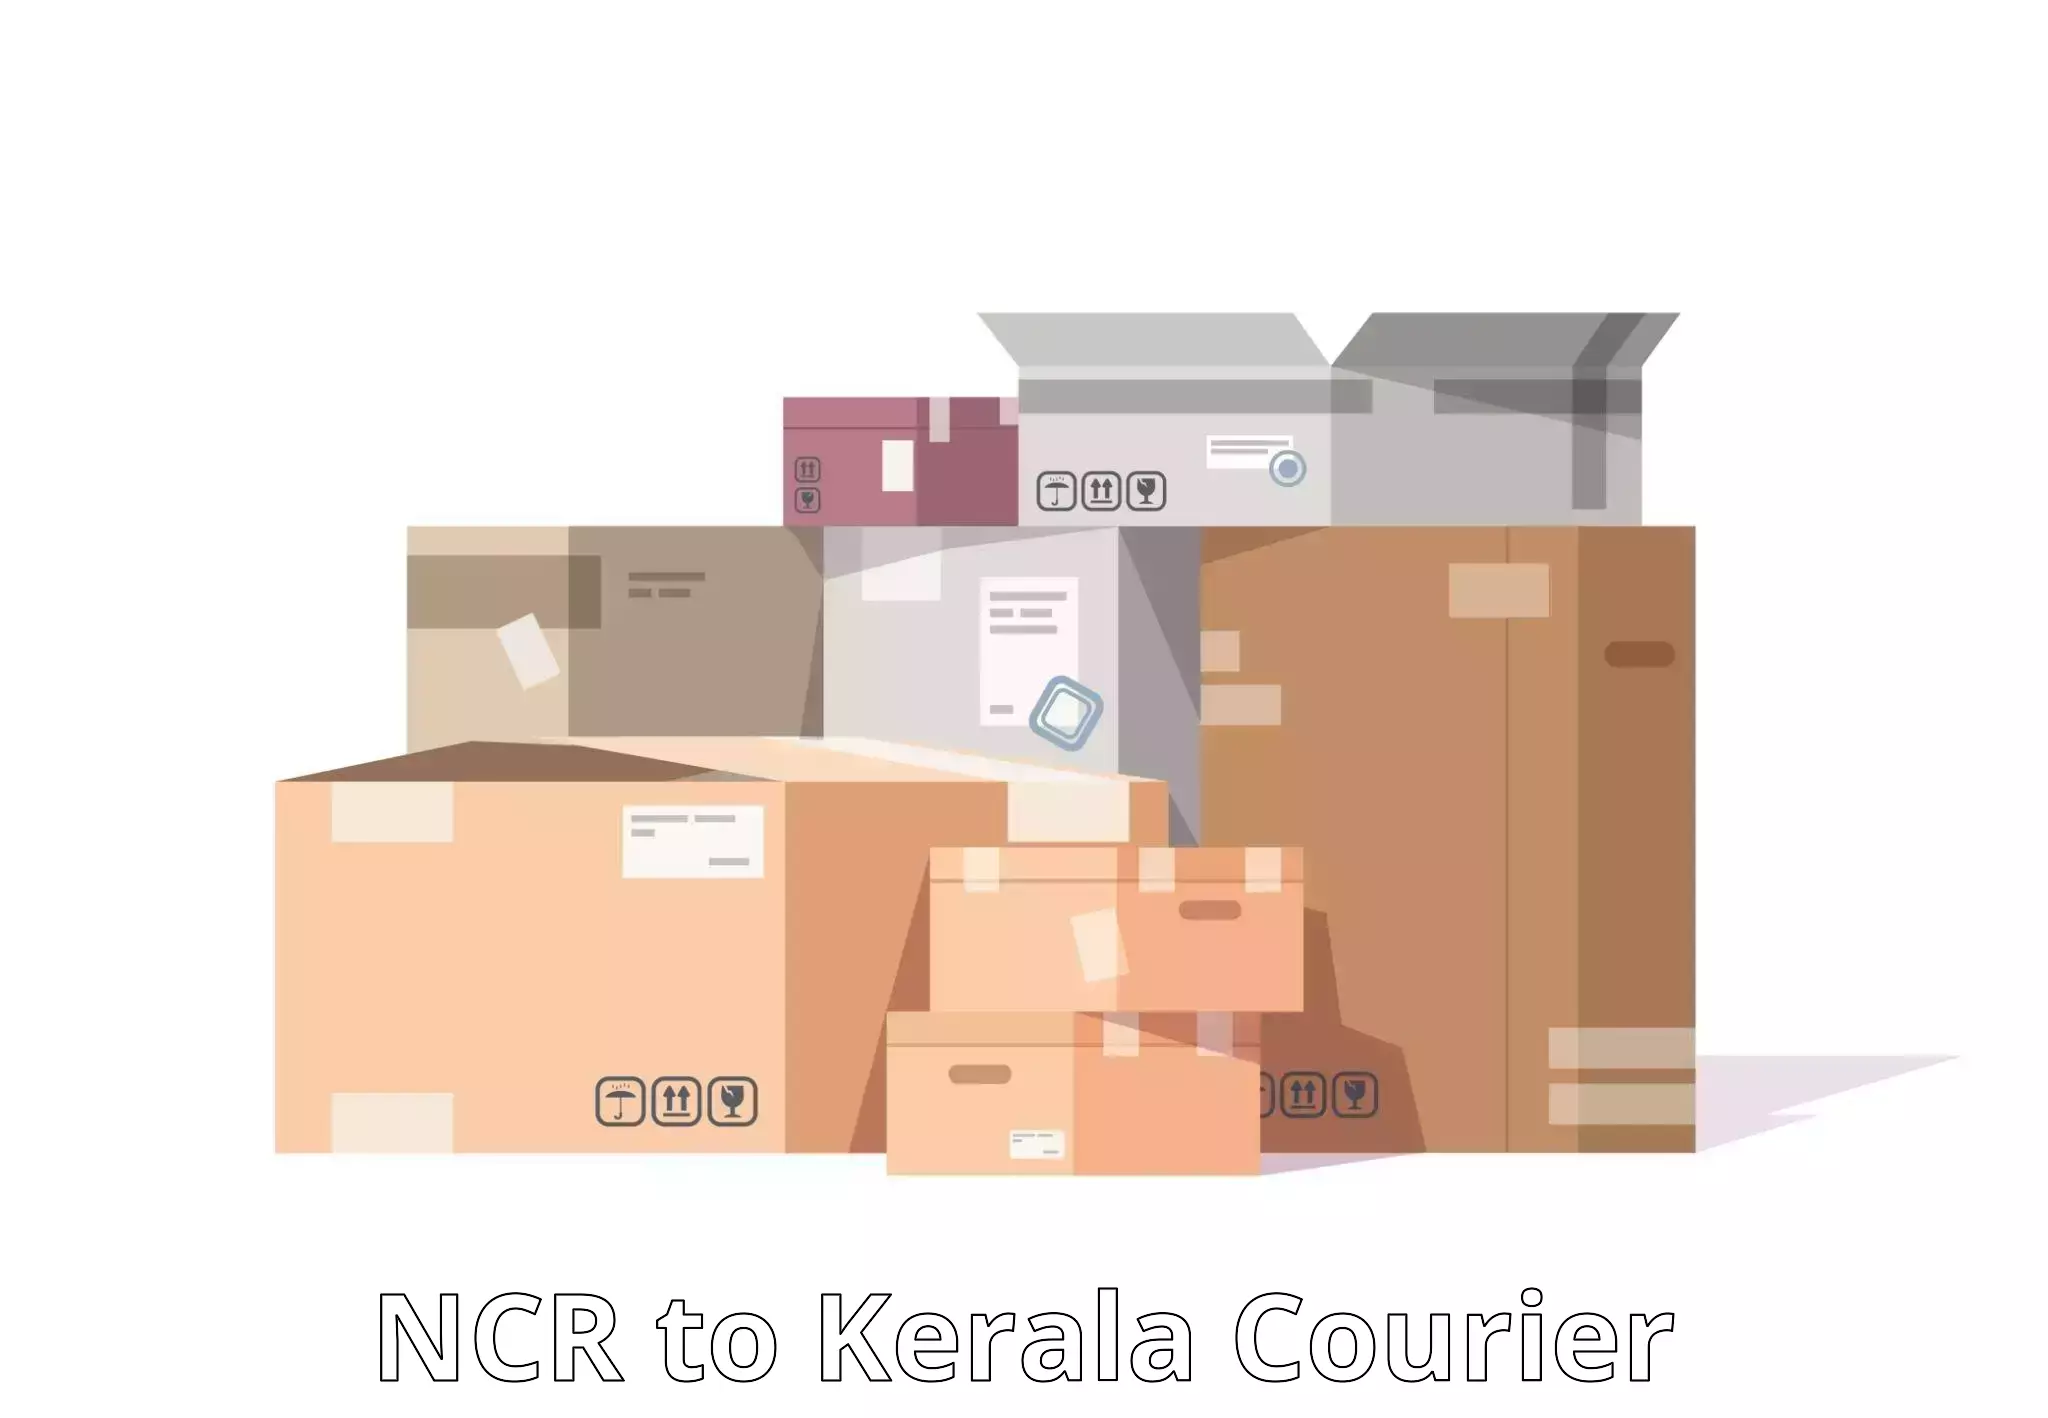 On-call courier service NCR to Kerala